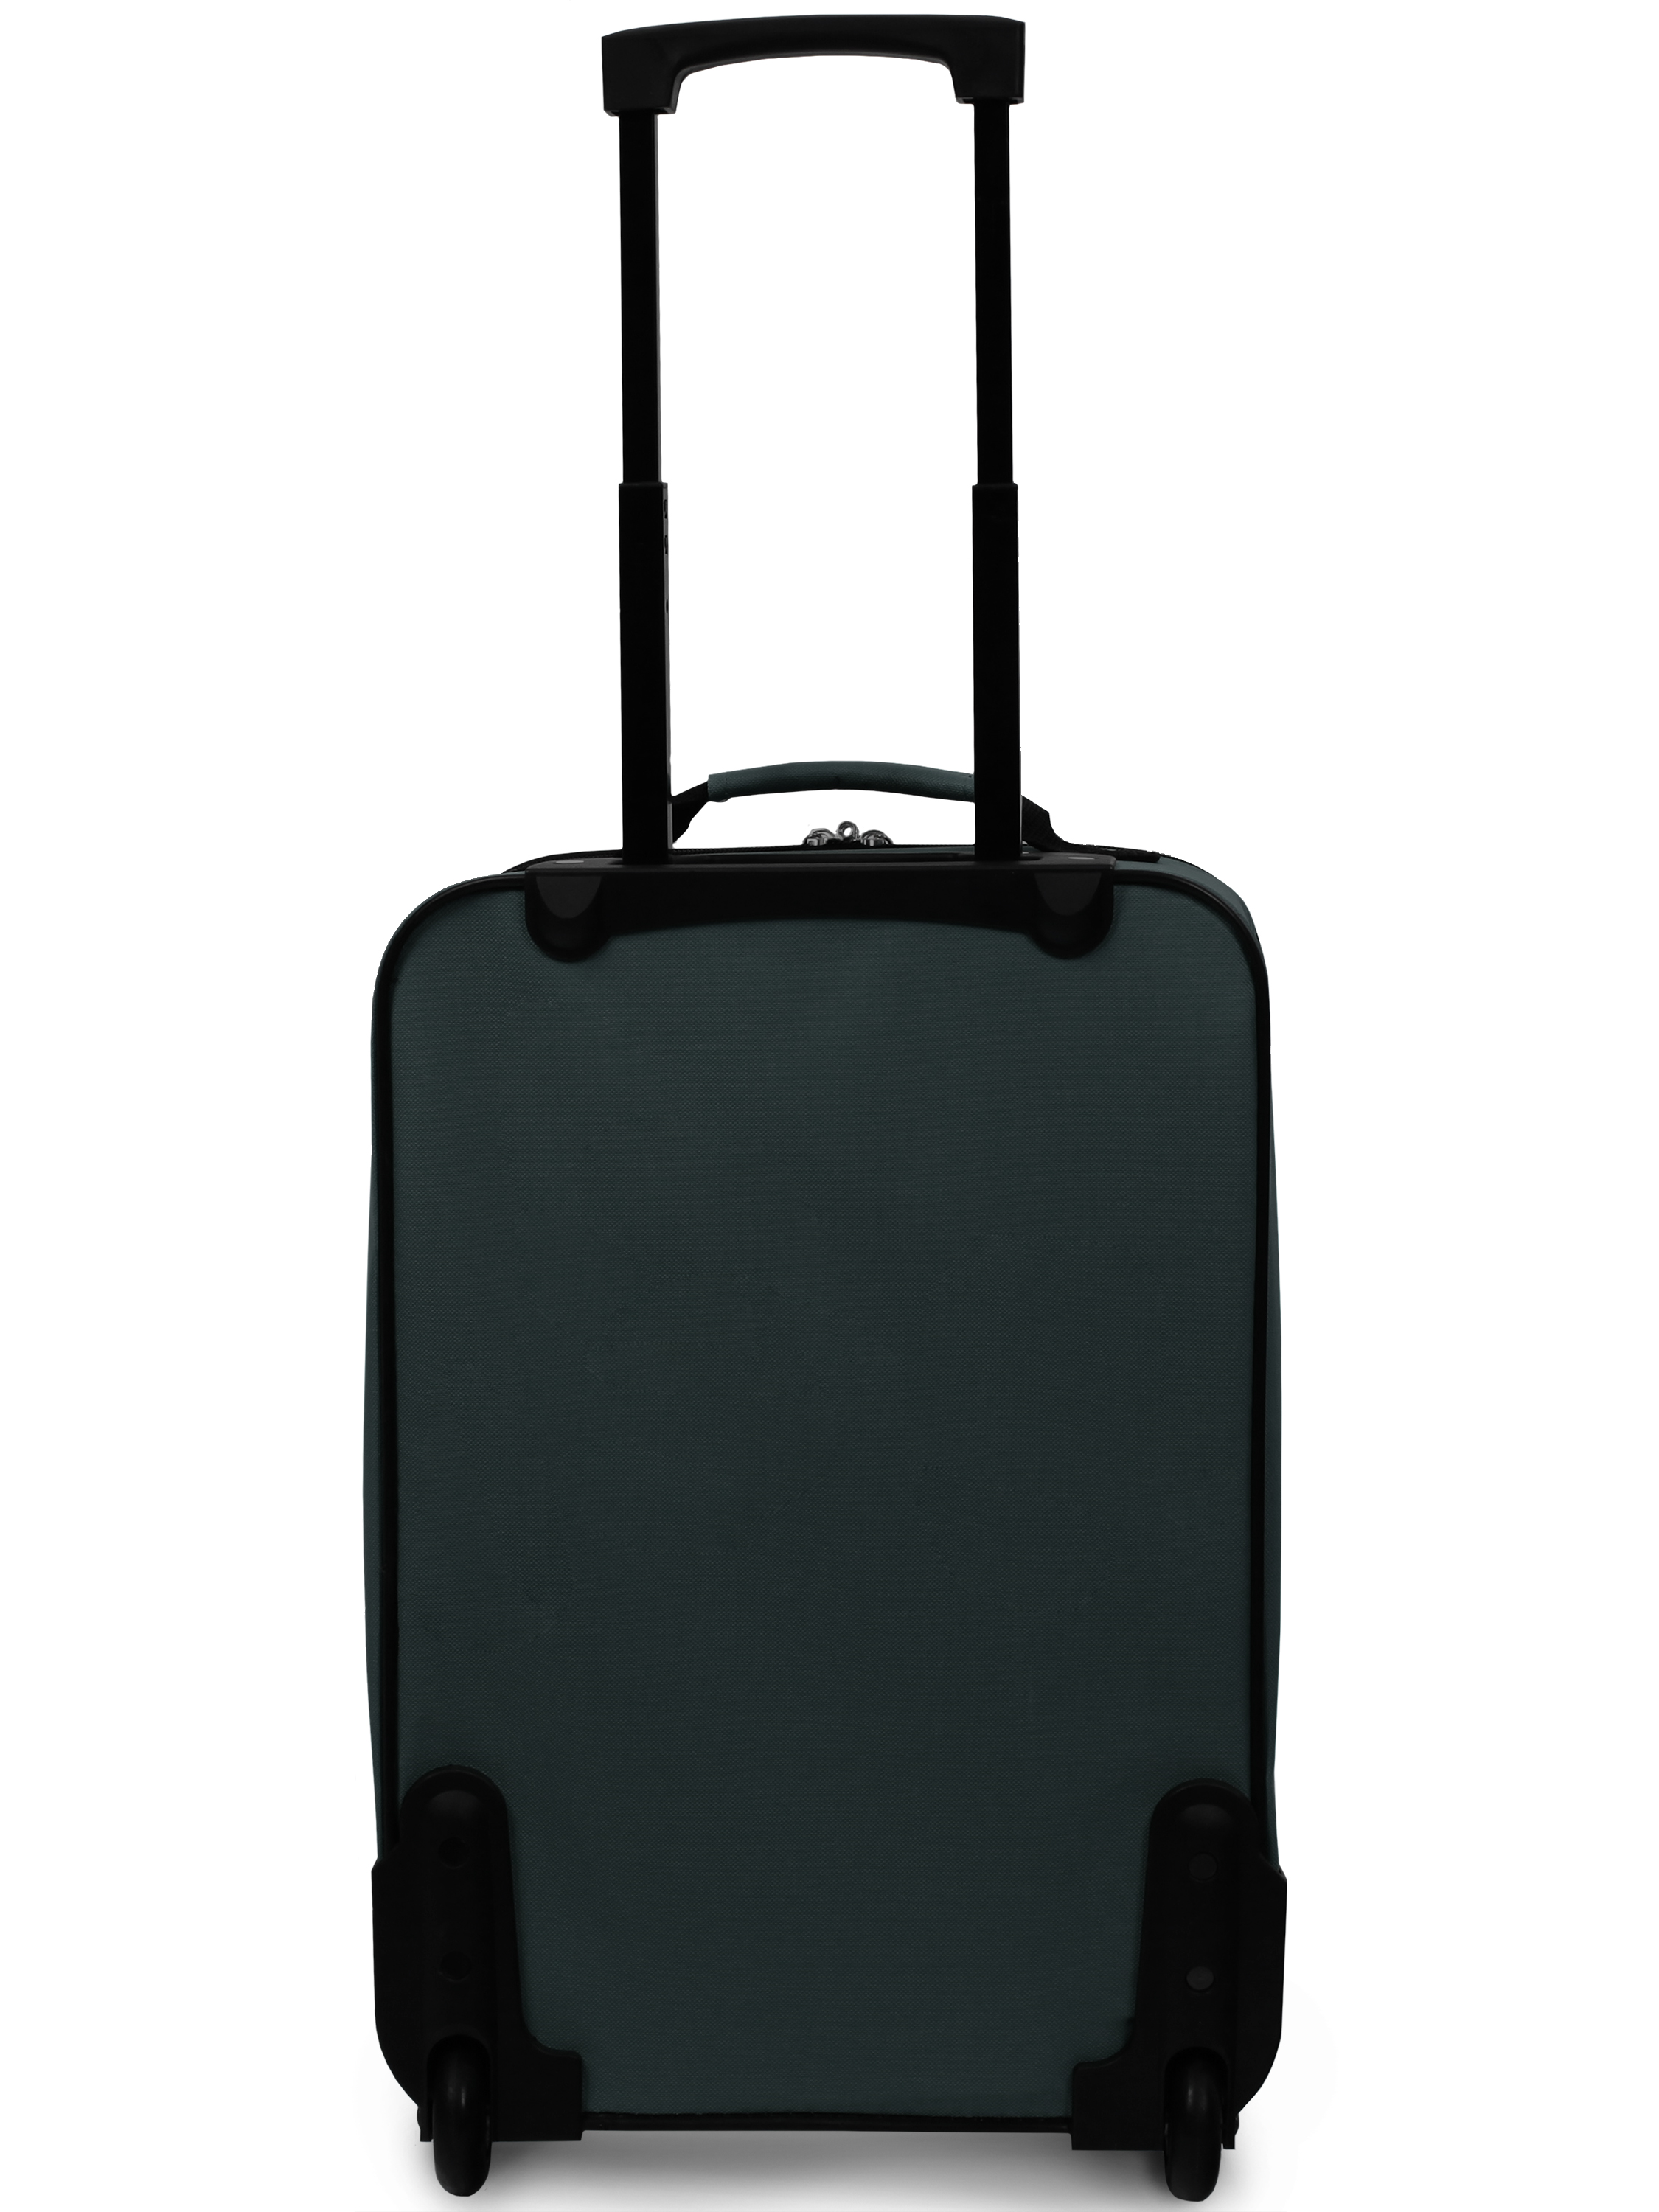 Protege Pilot Case 18" Softside Carry-on Luggage, Green - image 5 of 7